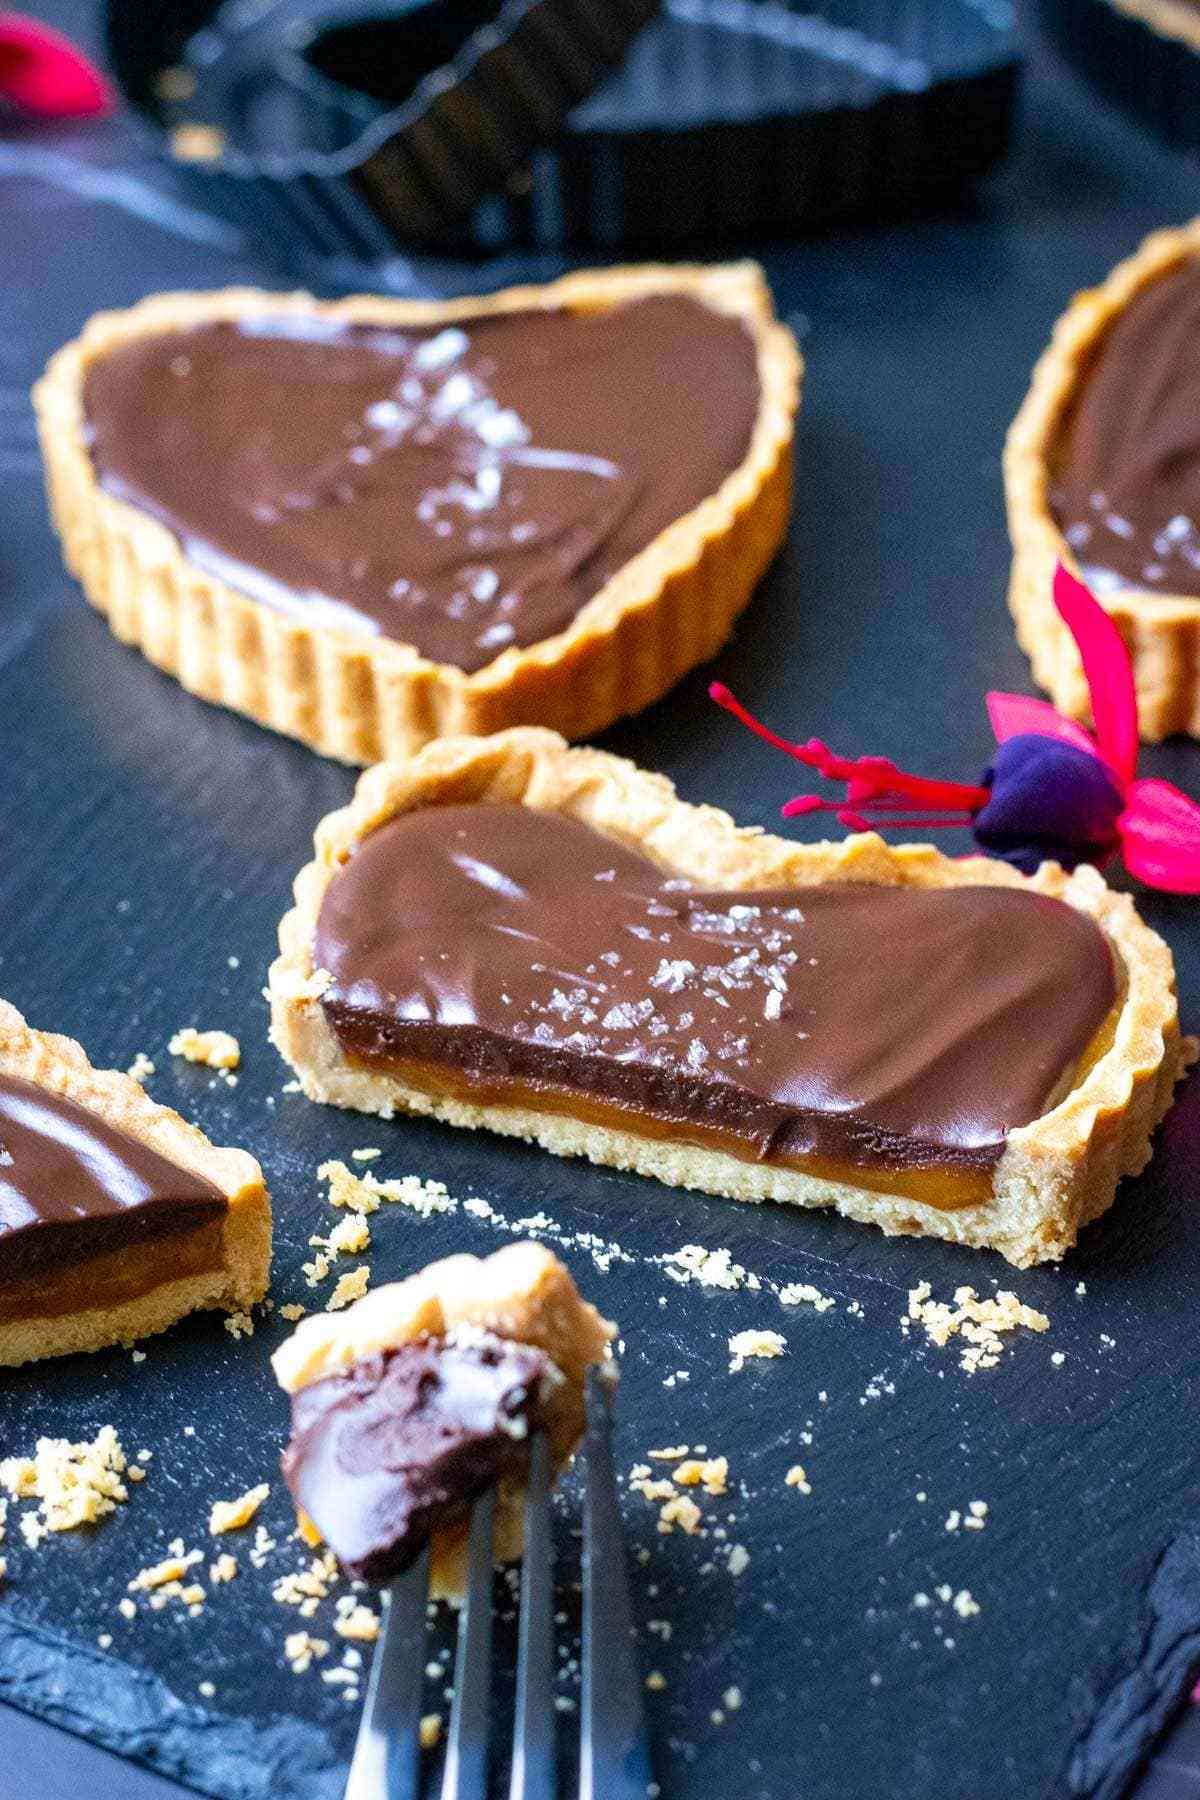 Heart shaped tartlets filled with caramel and chocolate.